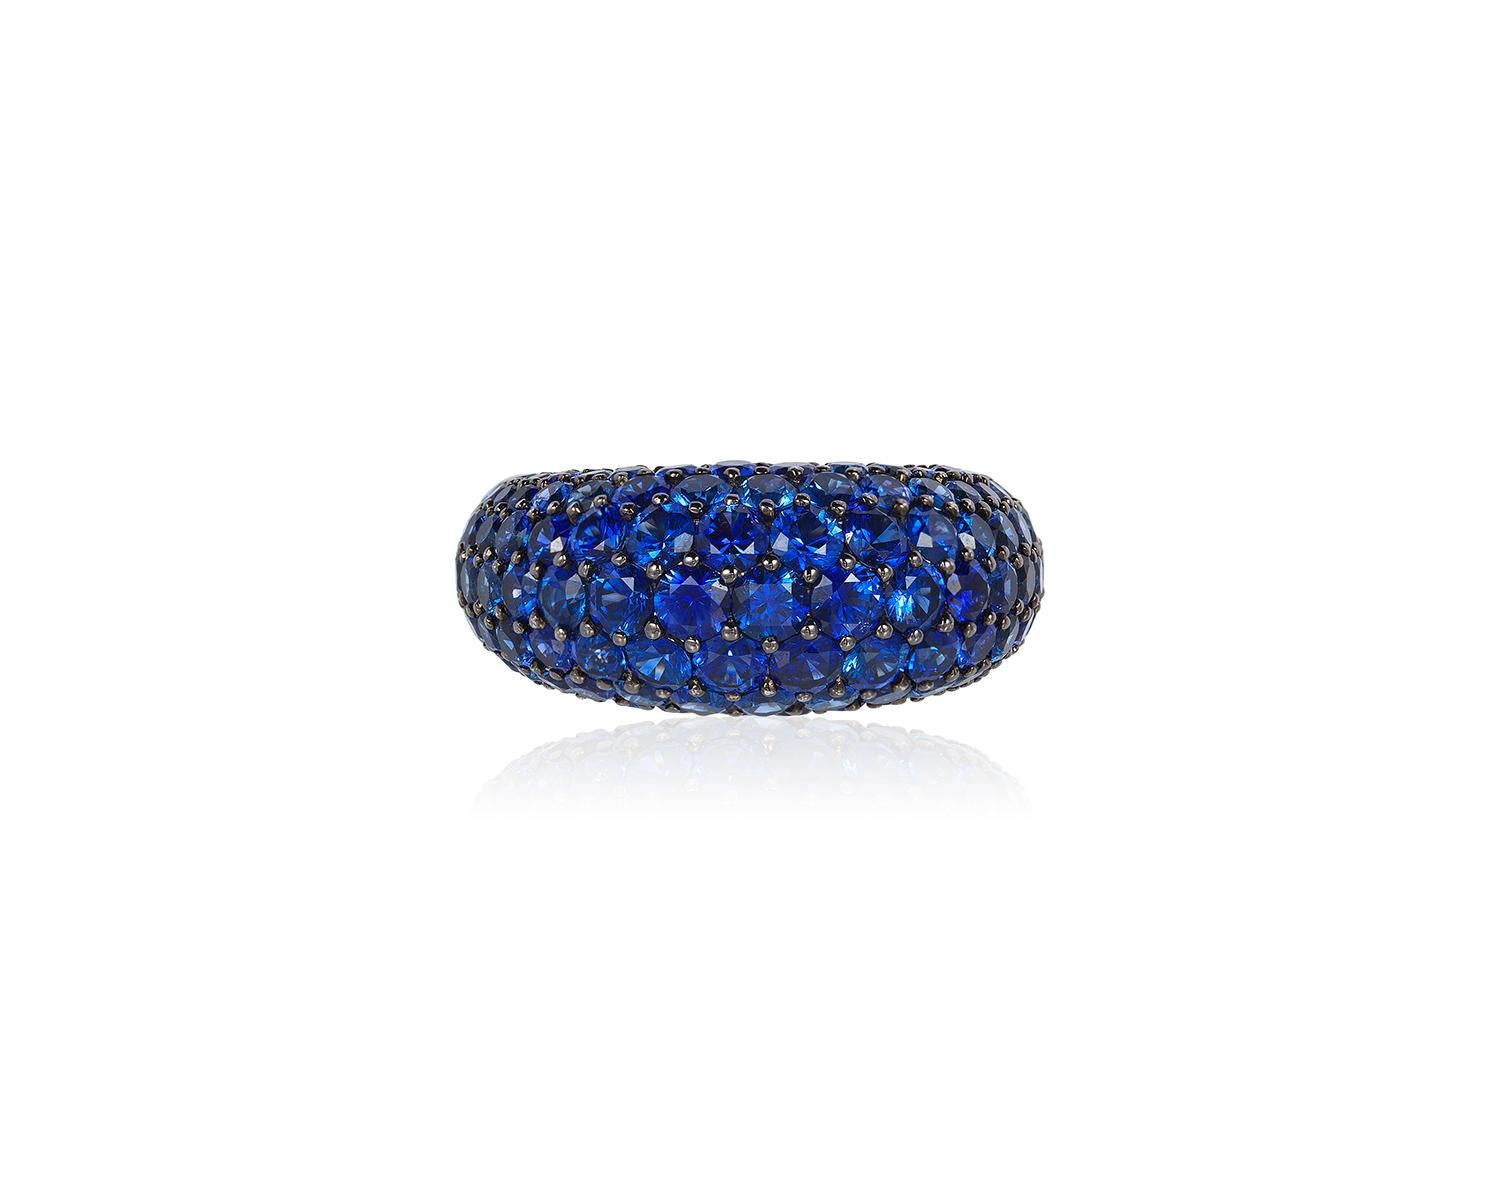 Blue Sapphire Dome Ring Cocktail  18k White Gold Andreoli

This Andreoli Blue Sapphire dome ring features a graduated  style array of blue sapphires that gradually get larger as you approach to the center of the dome. 

Specifications:
- 10.46 carat